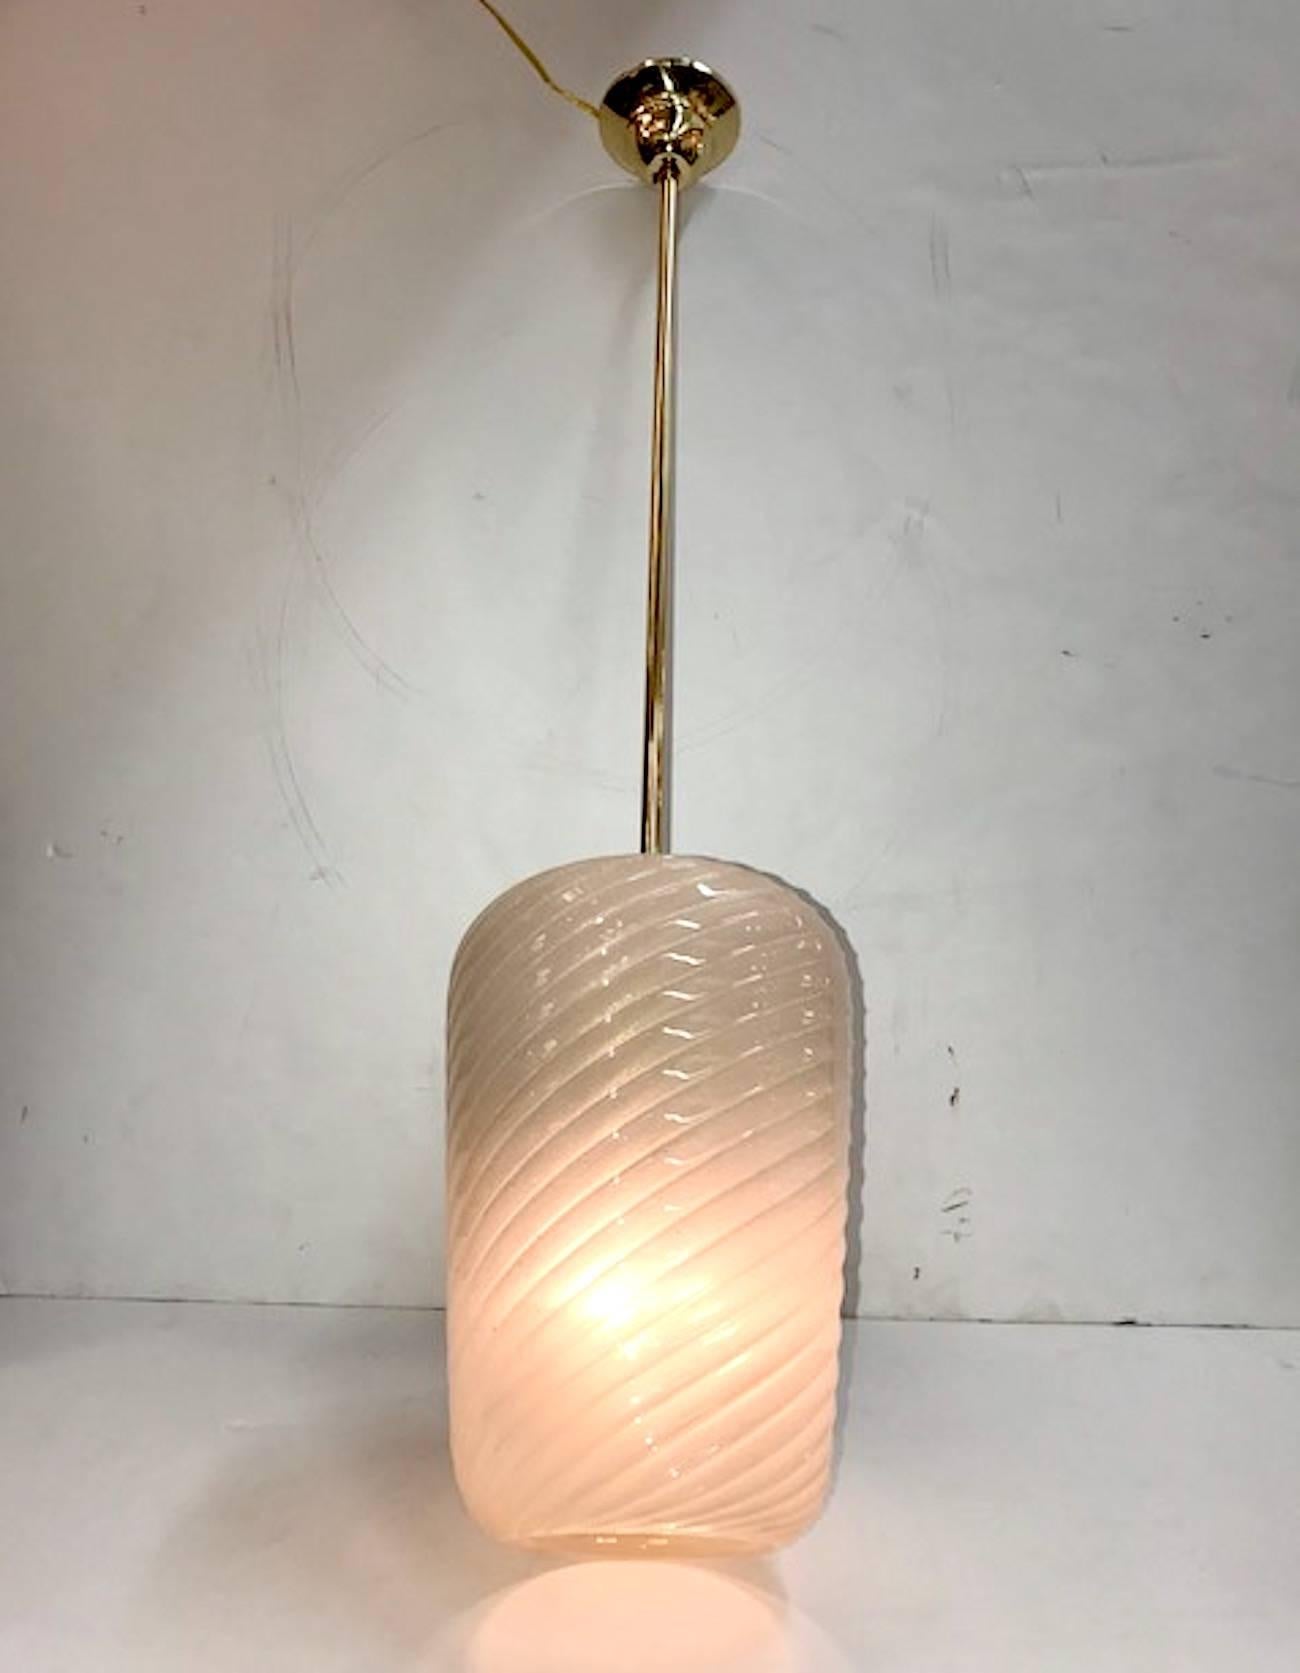 Italian circa 1950 pendant light in brass with handblown glass shade. The glass is opaque beige with gold flecks known as aventurine. The shade is handblown in with a spiral wide rib design and wider at the top and tapering slightly at the open